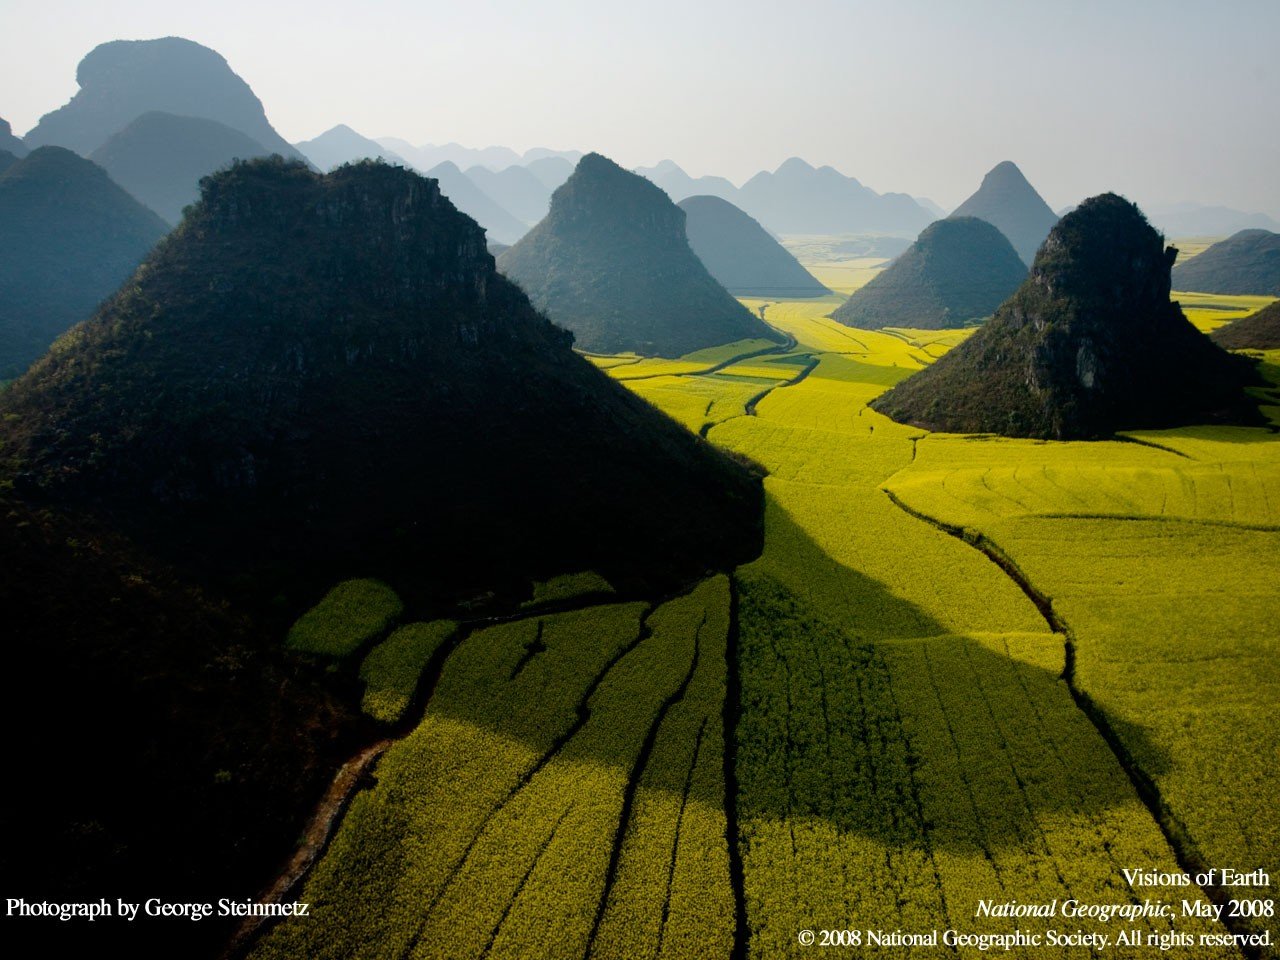 Asia, National Geographic, Mountains Wallpaper